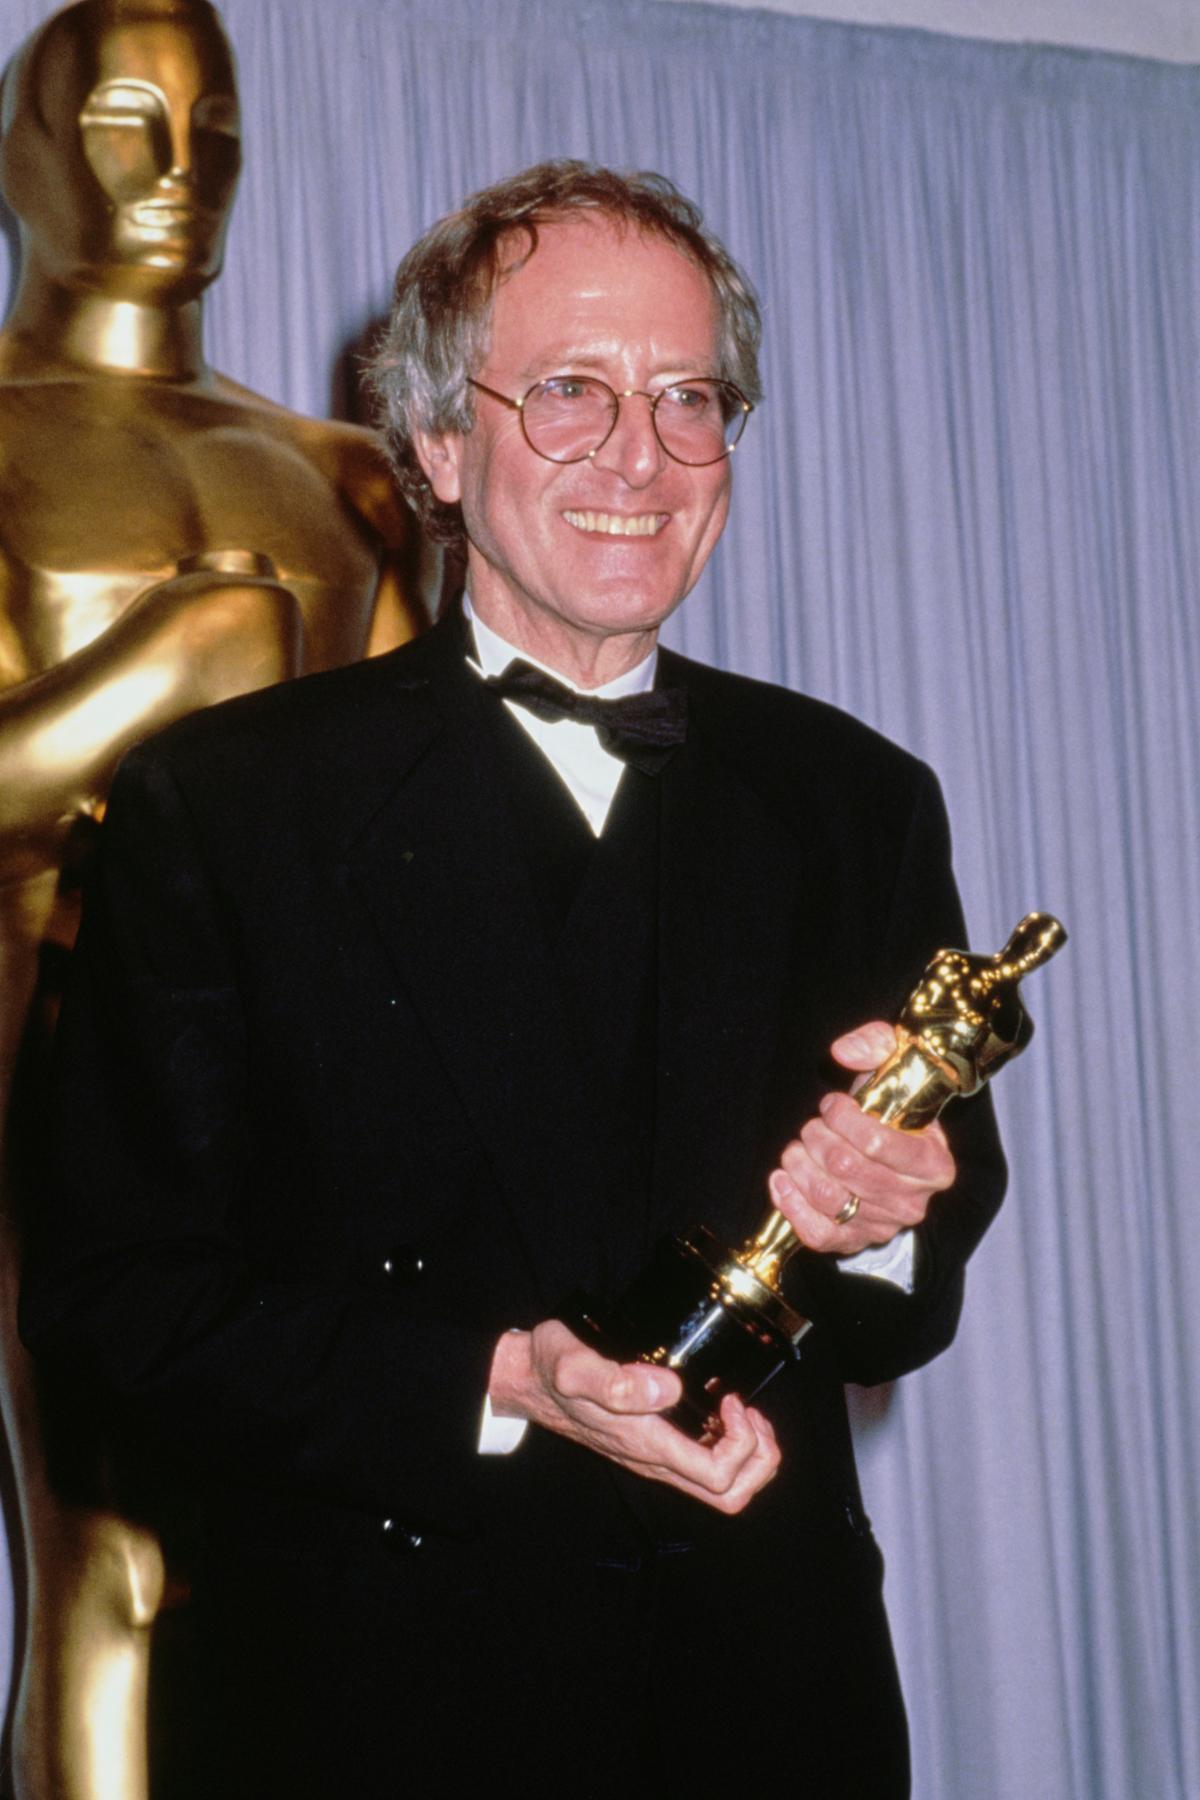 Composer John Barry holding his Best Original Score award for "Dances with Wolves," at the 63rd Annual Academy Awards in 1991. (Vinnie Zuffante/Getty Images)